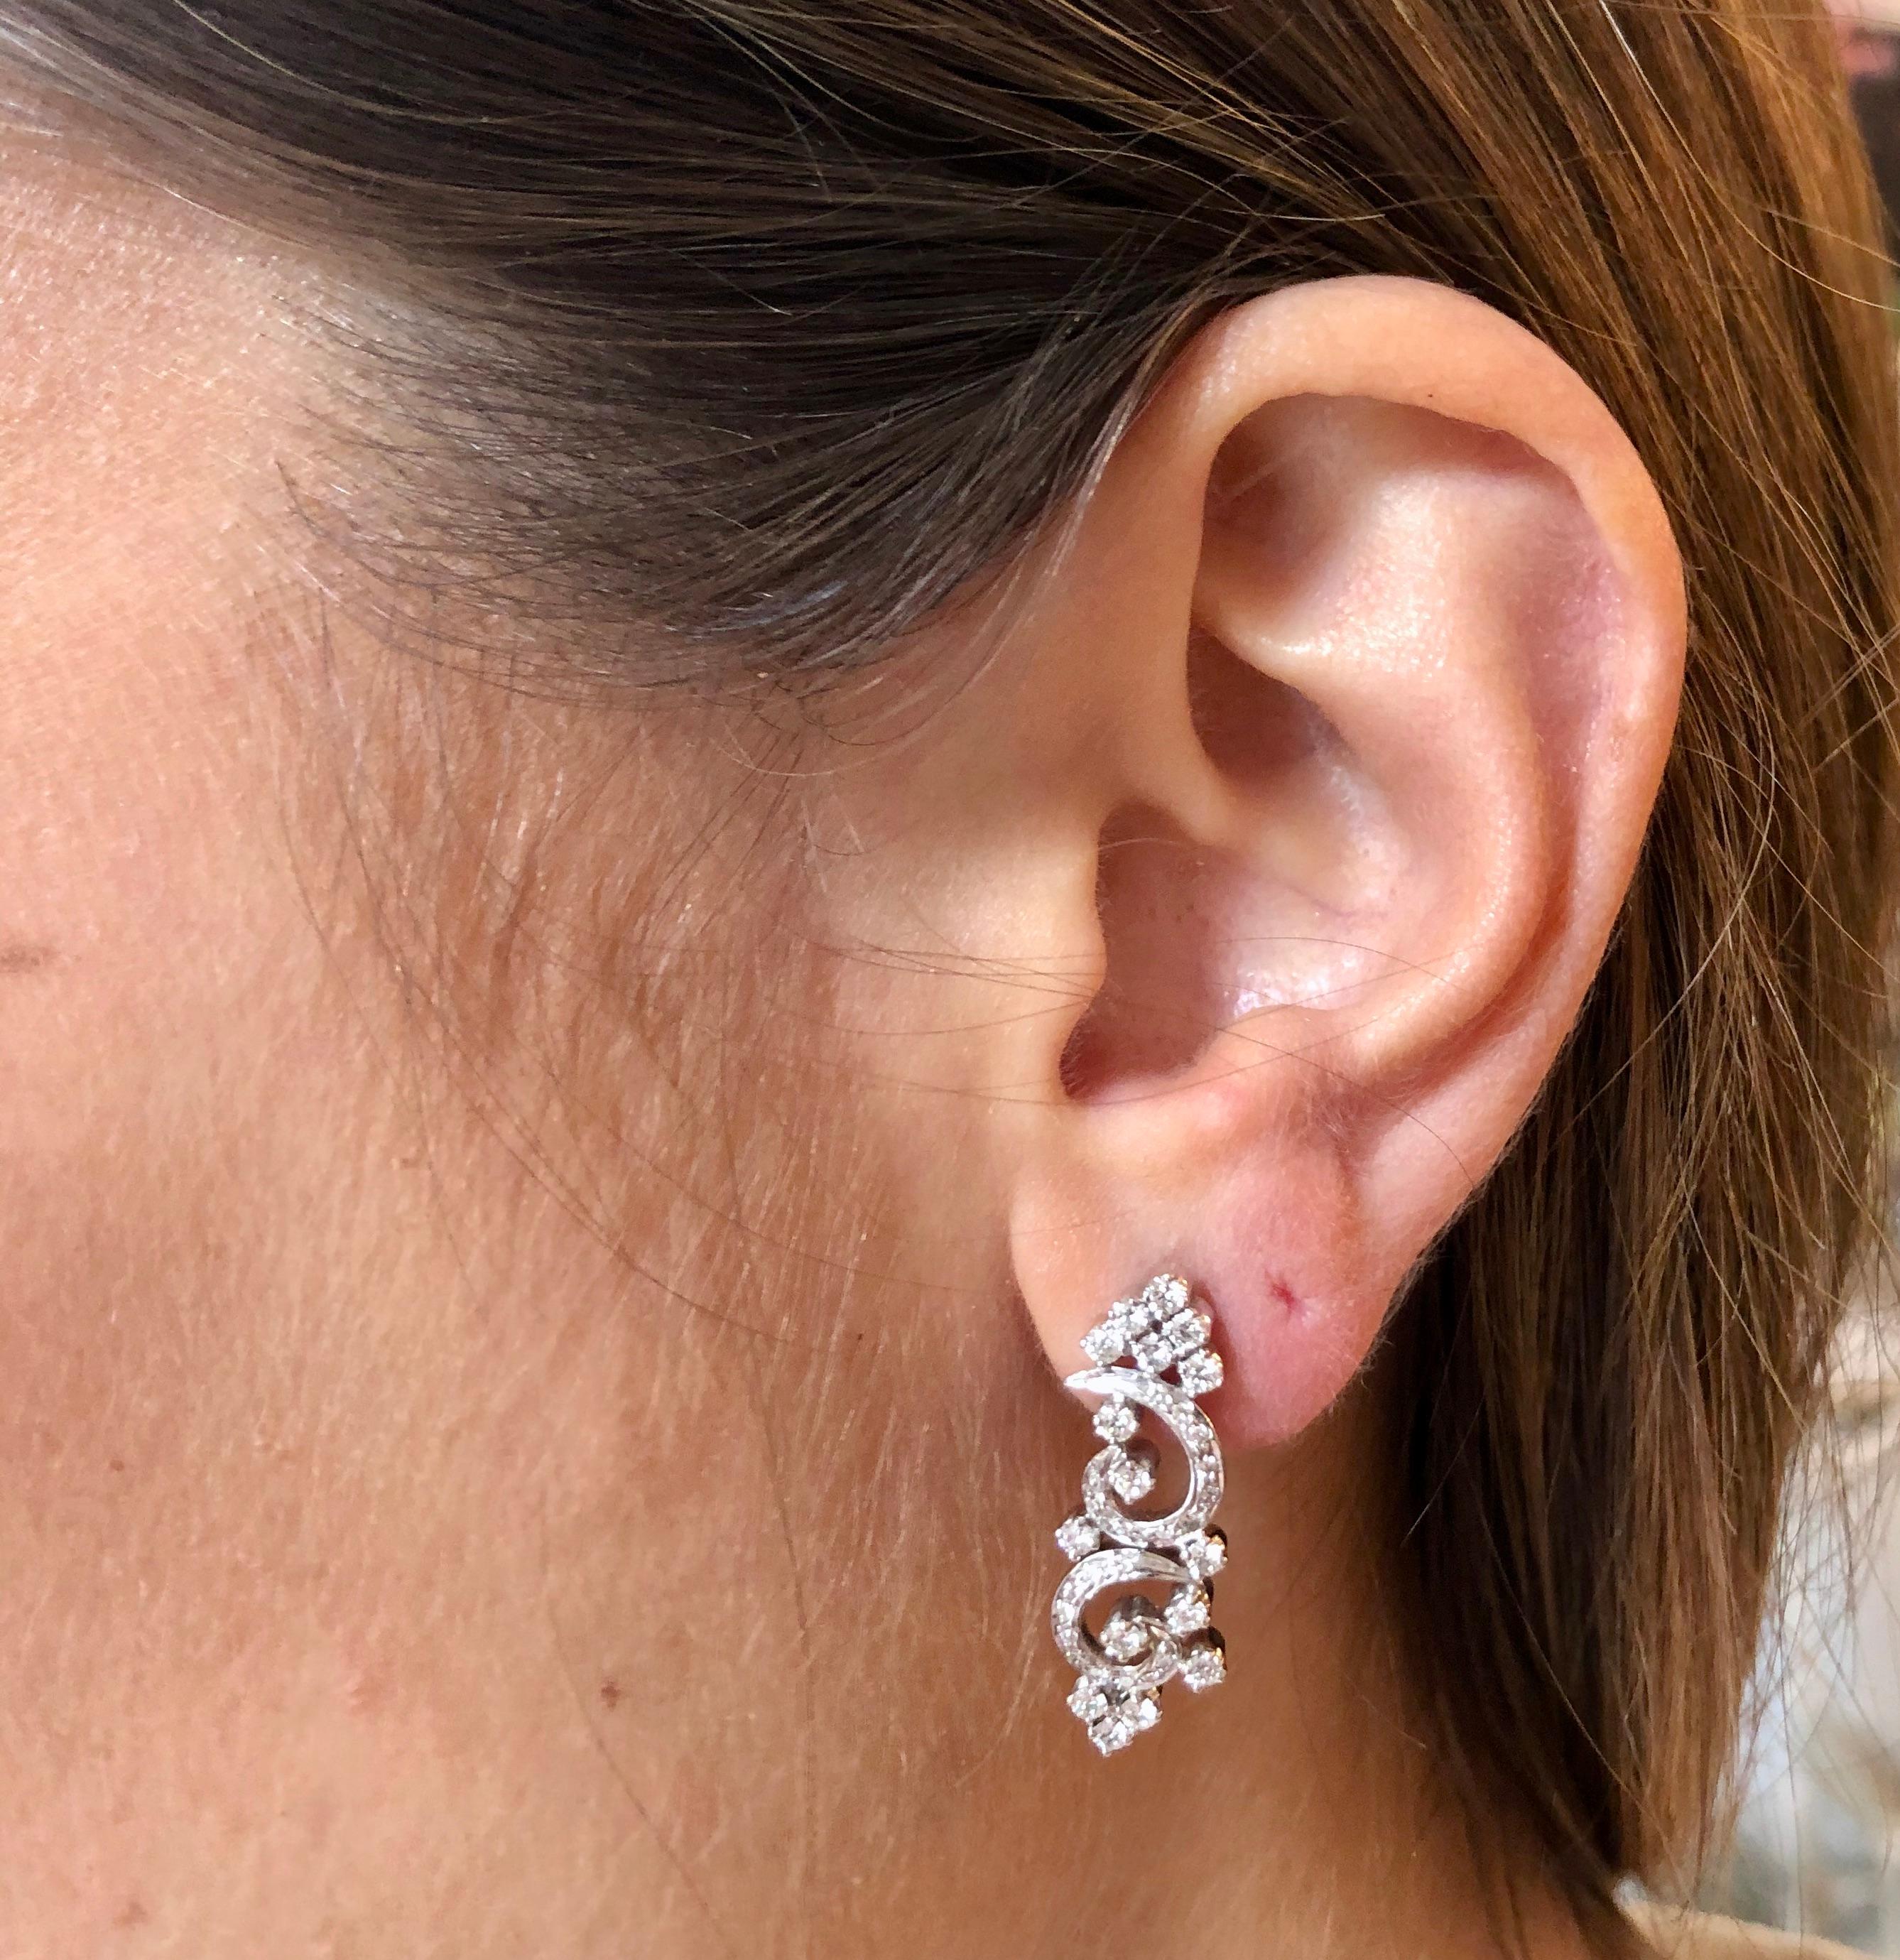 Art Deco style Diamond double scroll earrings set with a myriad of brilliant cut diamonds set in 18k white gold.
Post and butterfly fittings. 

The earrings are gracefully proportioned. Each earring features a fine articulation which allows the